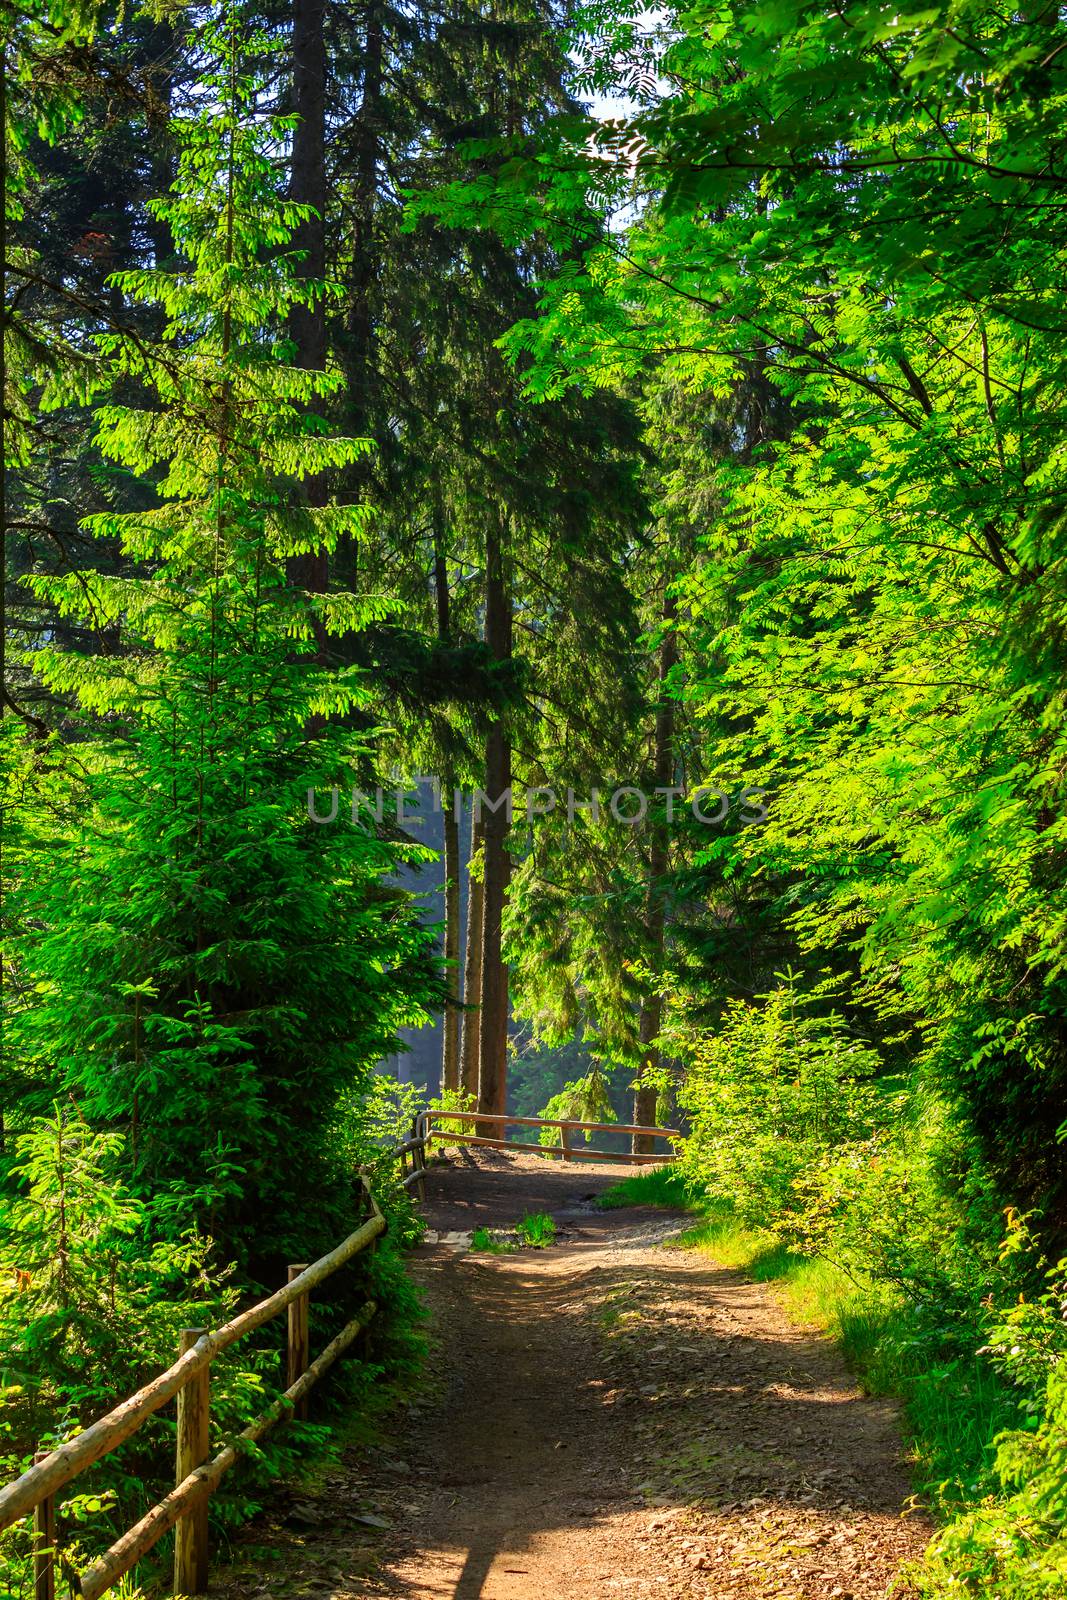 narrow mountain path in a coniferous forest. small wooden fence near the slope of the path. trail in the backlight, turn to the right